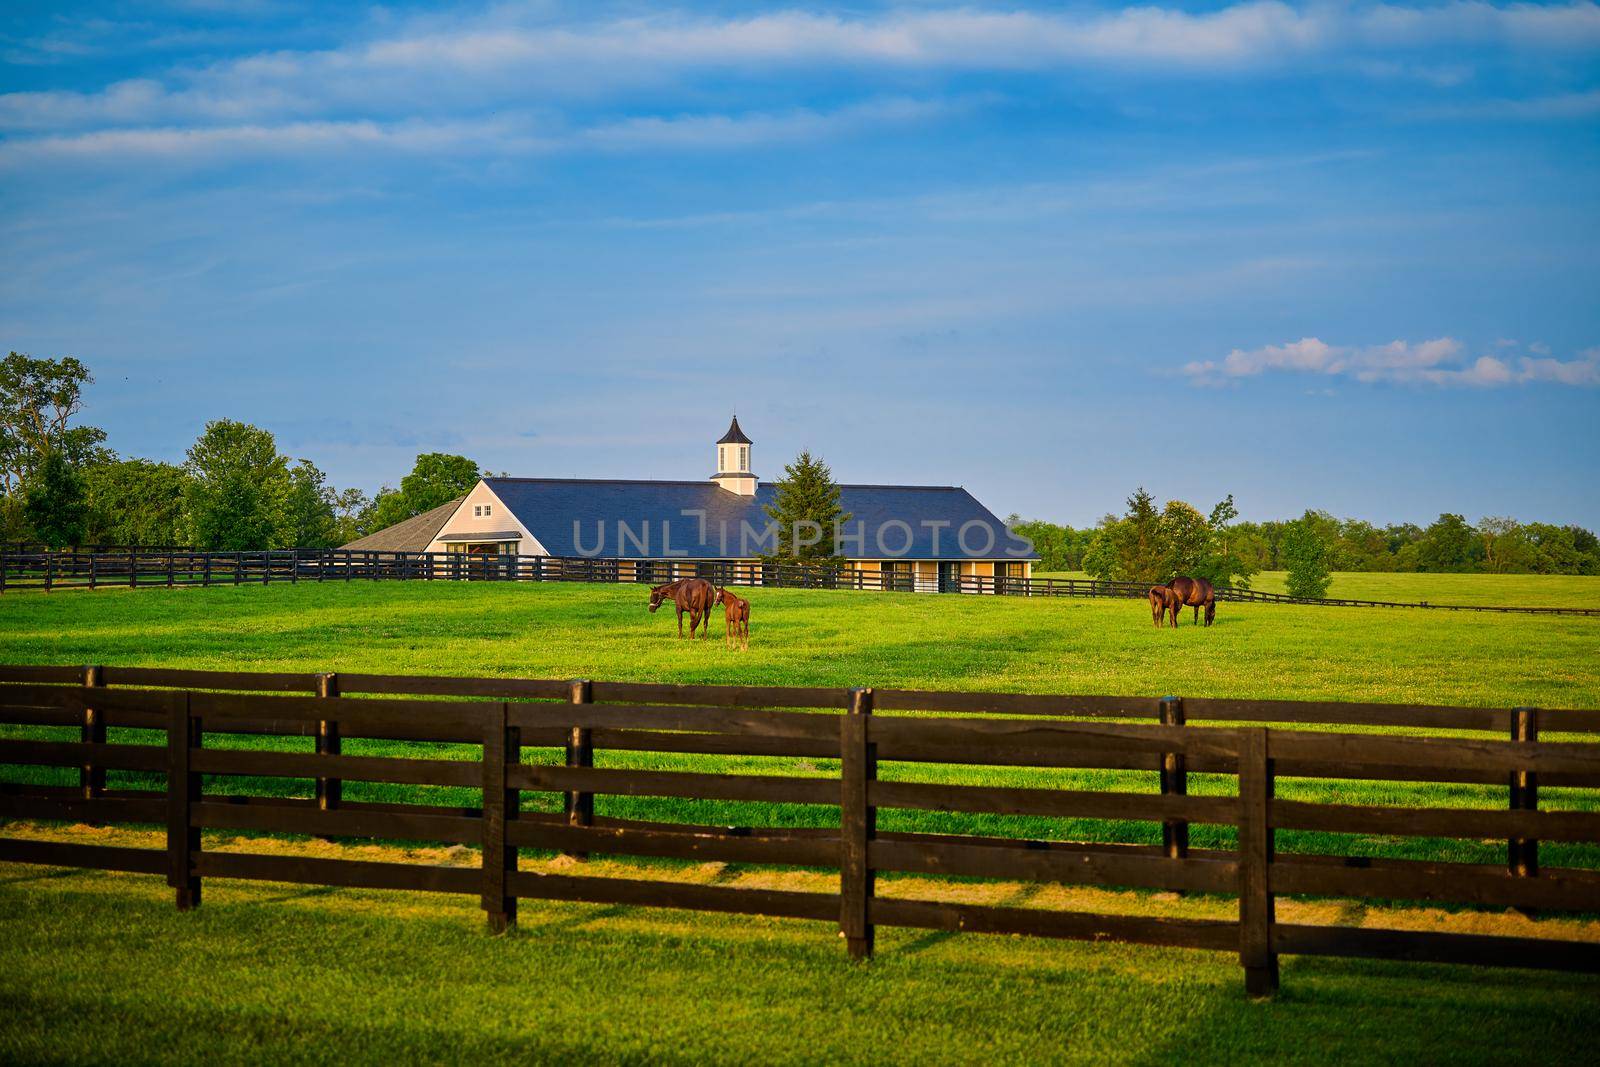 Thoroughbred horses grazing in a field with horse barn in the background.